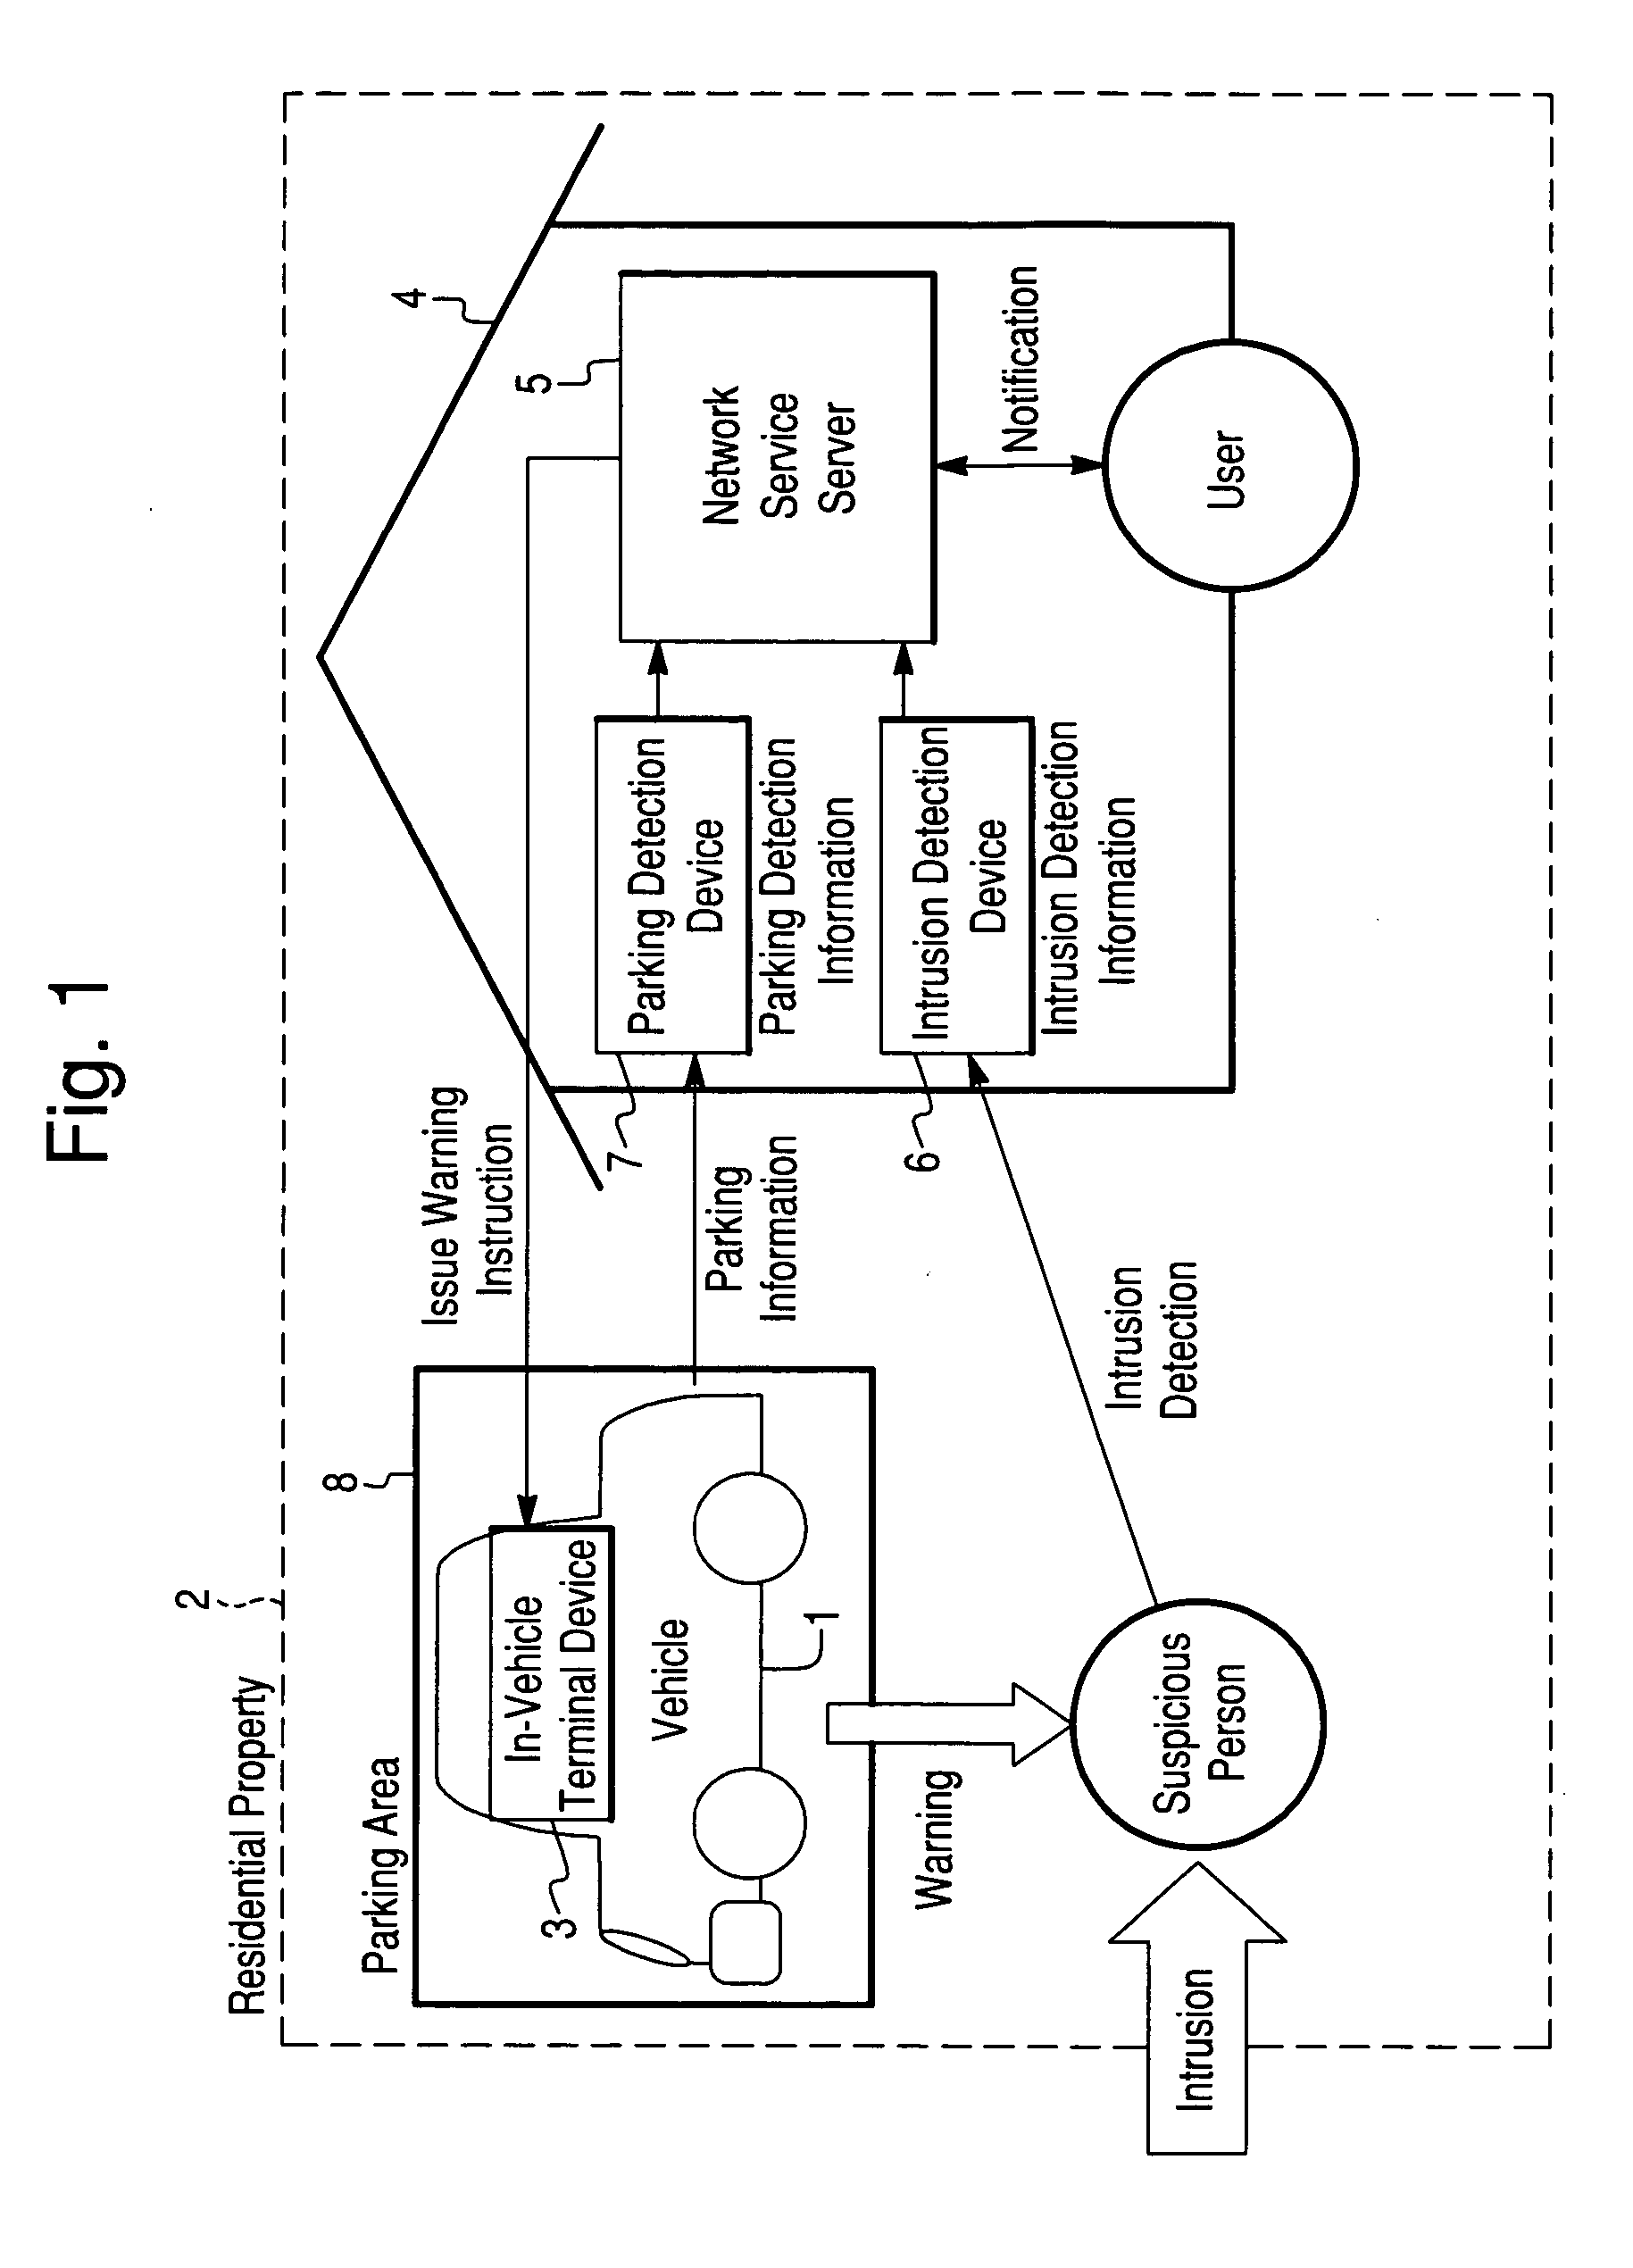 Security arrangement with in-vehicle mounted terminal